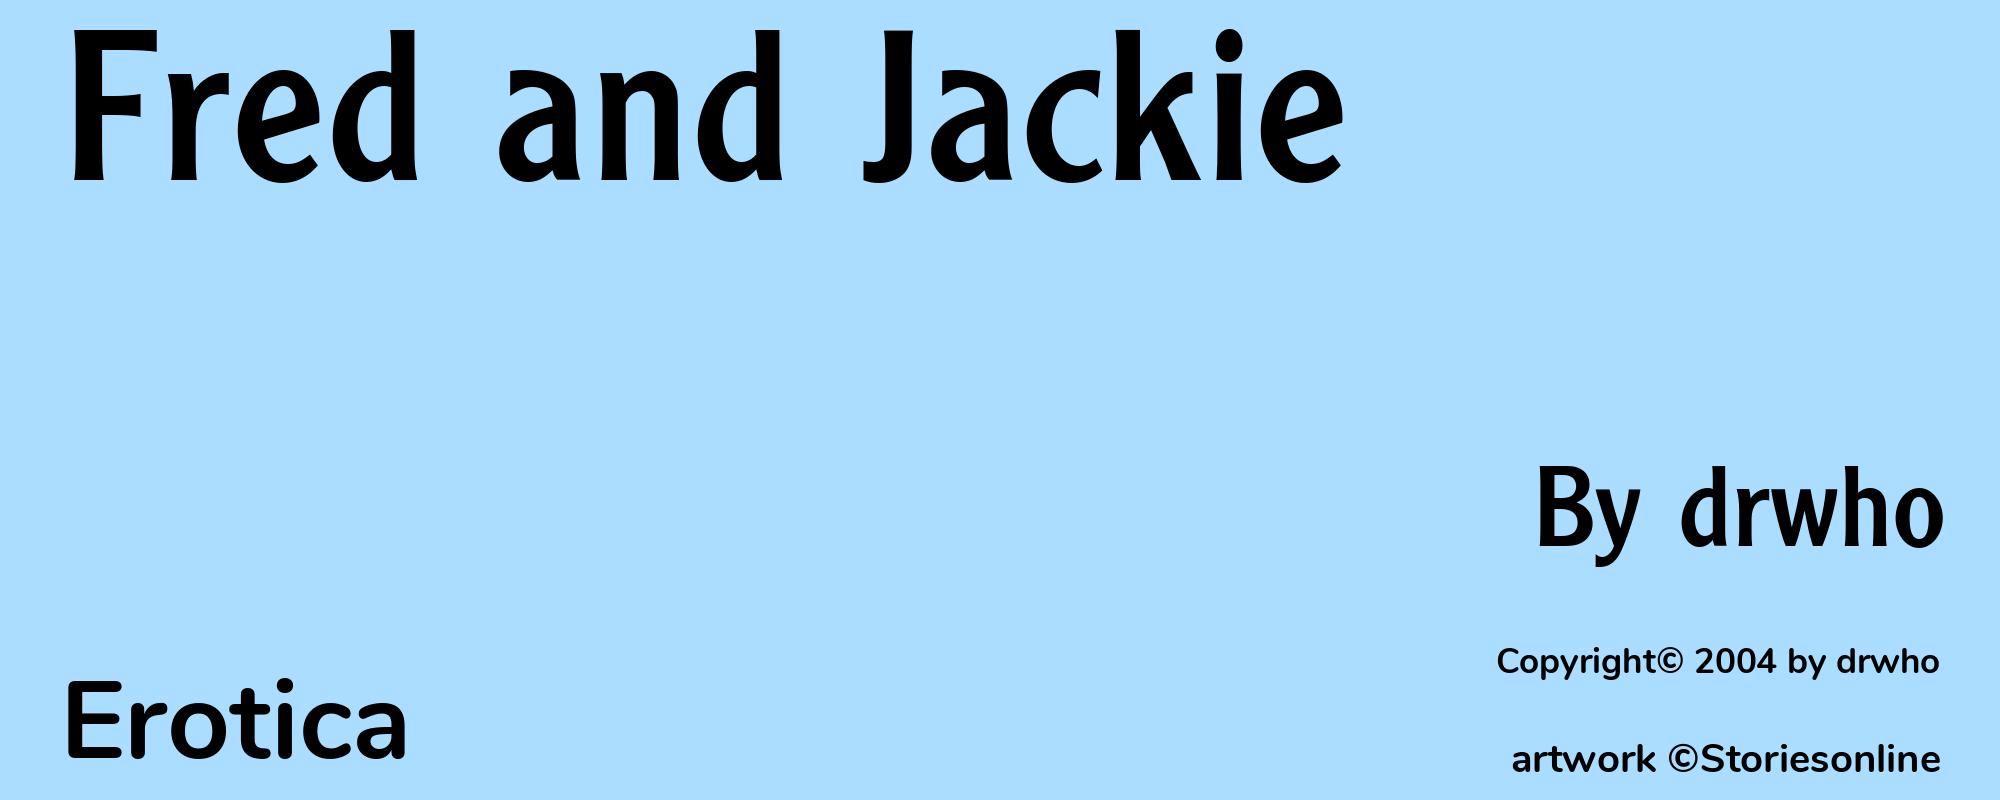 Fred and Jackie - Cover